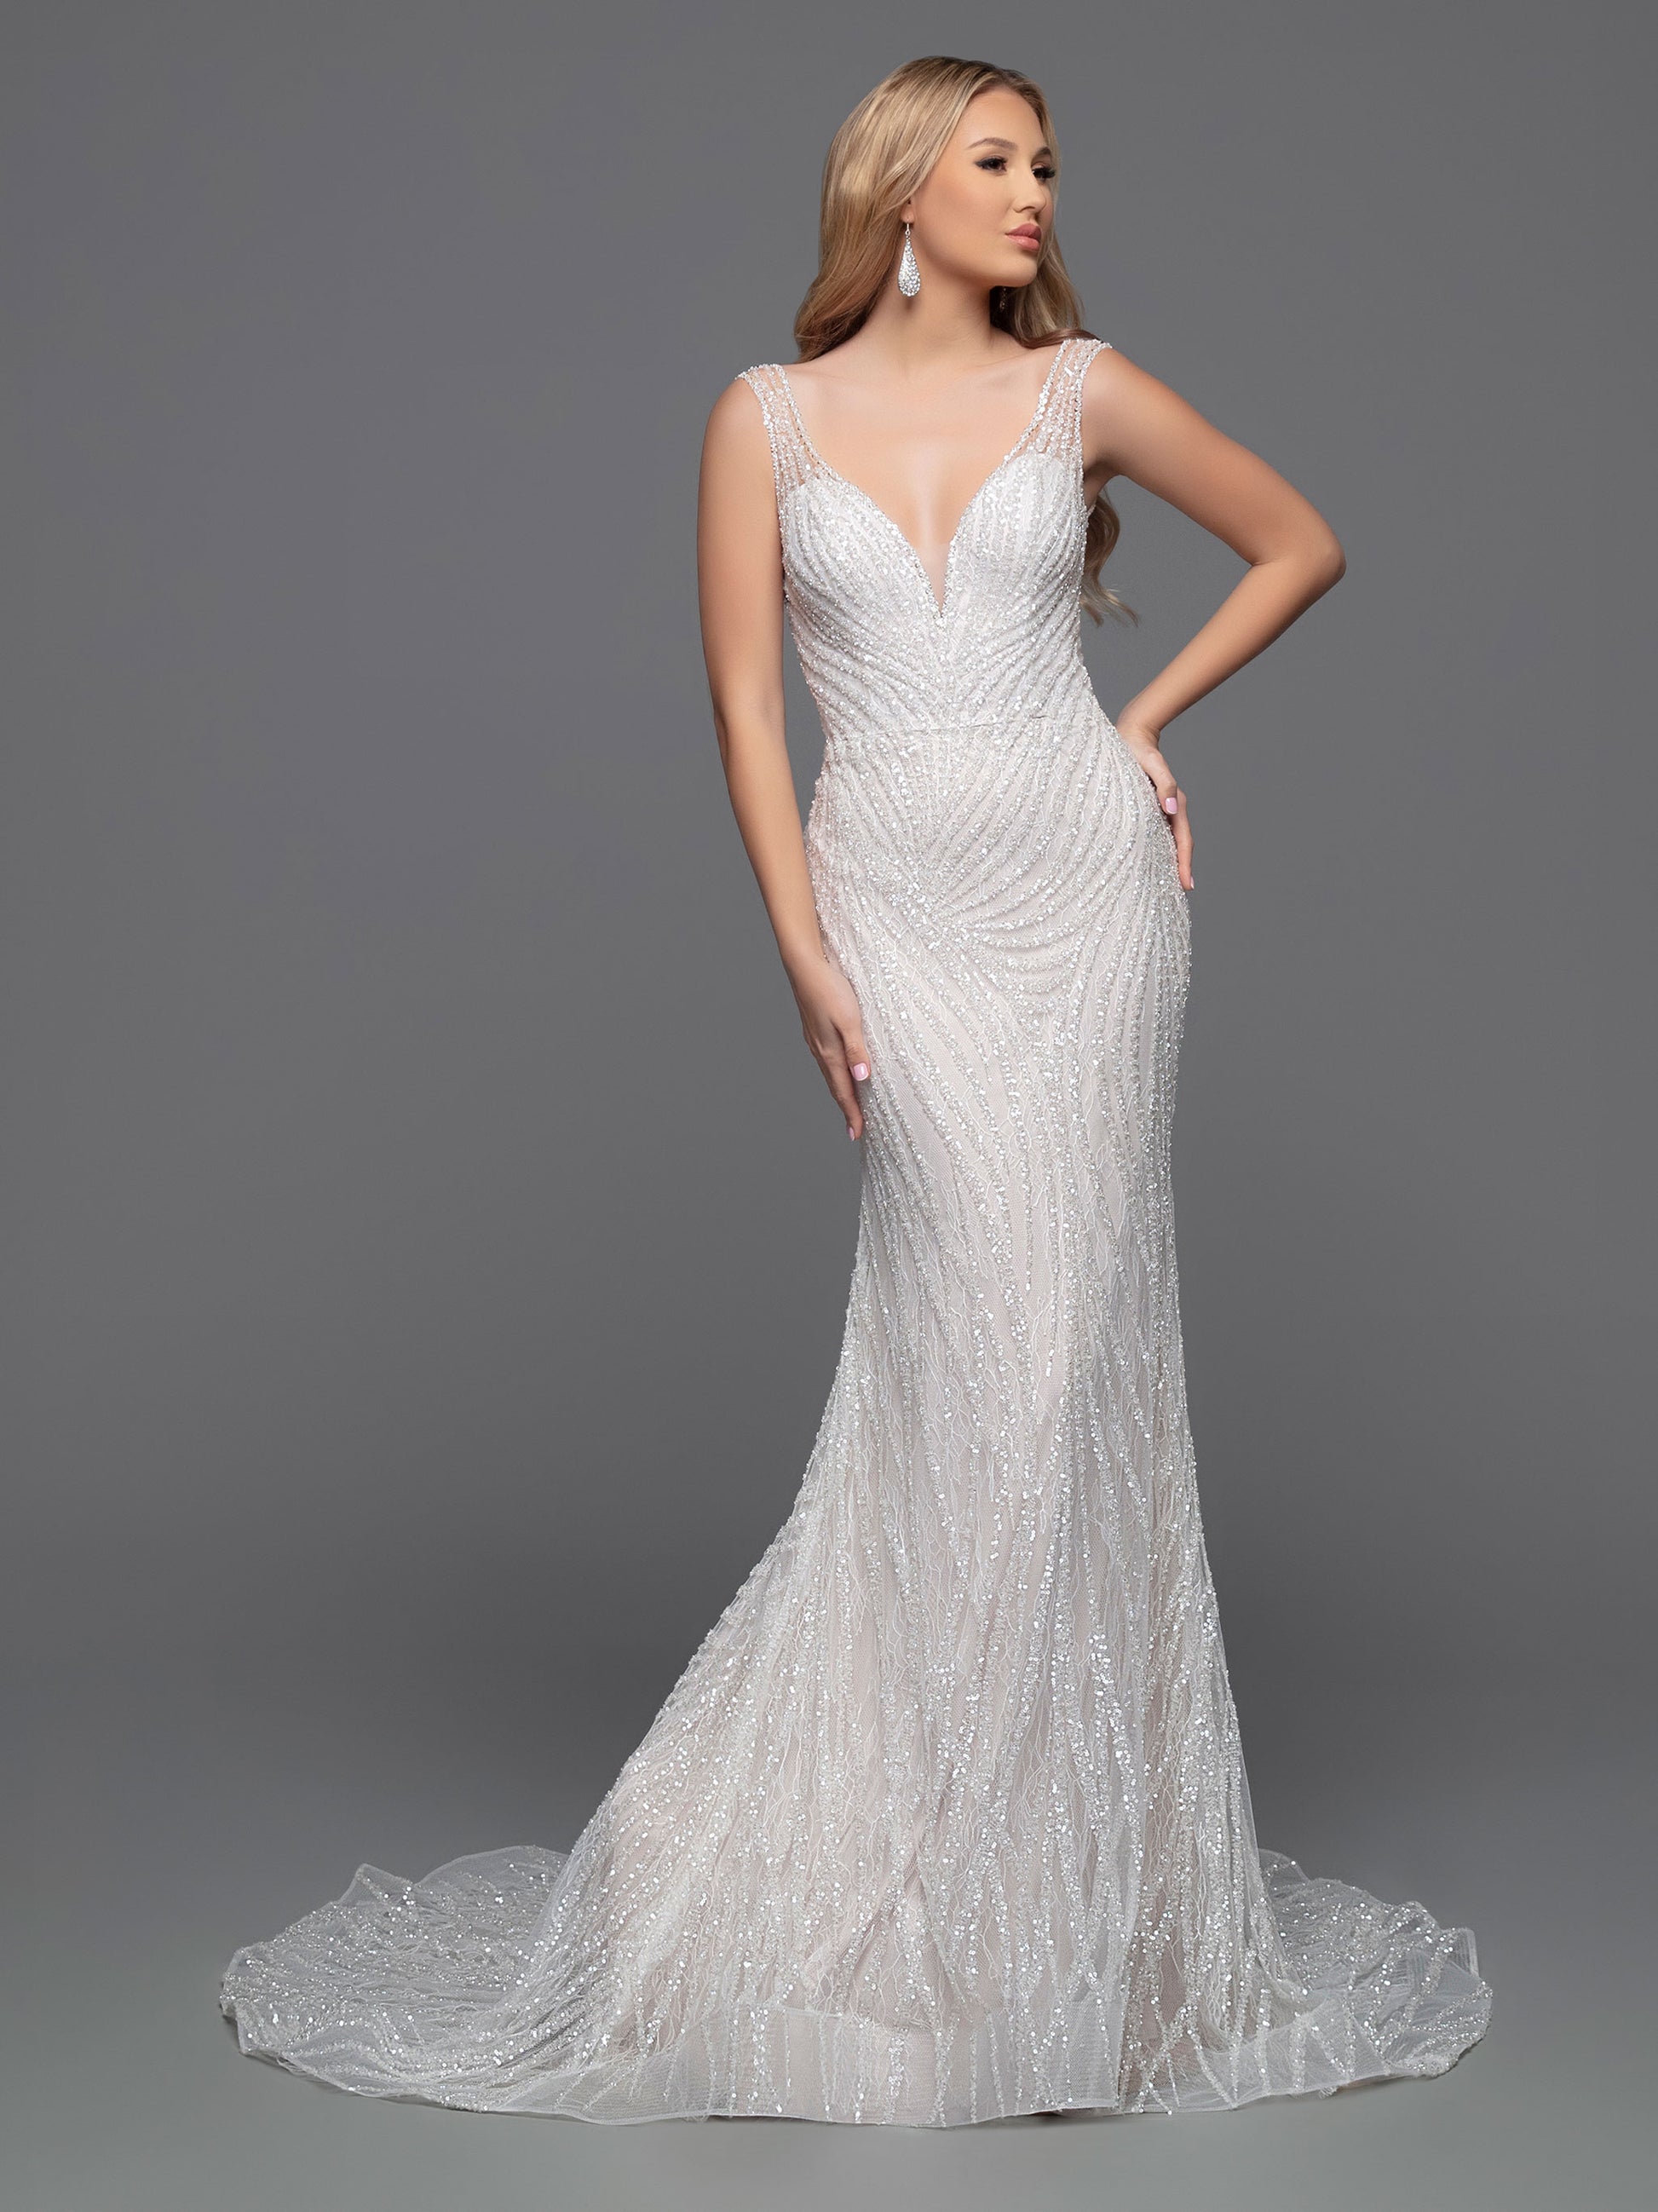 The Davinci Bridal 50800 wedding dress is the perfect combination of modern and classic style. Its fitted silhouette and V-neckline highlight a bride's shape while the geometric beading brings a touch of sparkle and glamour. The sheer straps and chapel train add a hint of allure. Ideal for a chic and sophisticated wedding.  Sizes: 2-20  Colors: Ivory/Ivory, Ivory/Nude